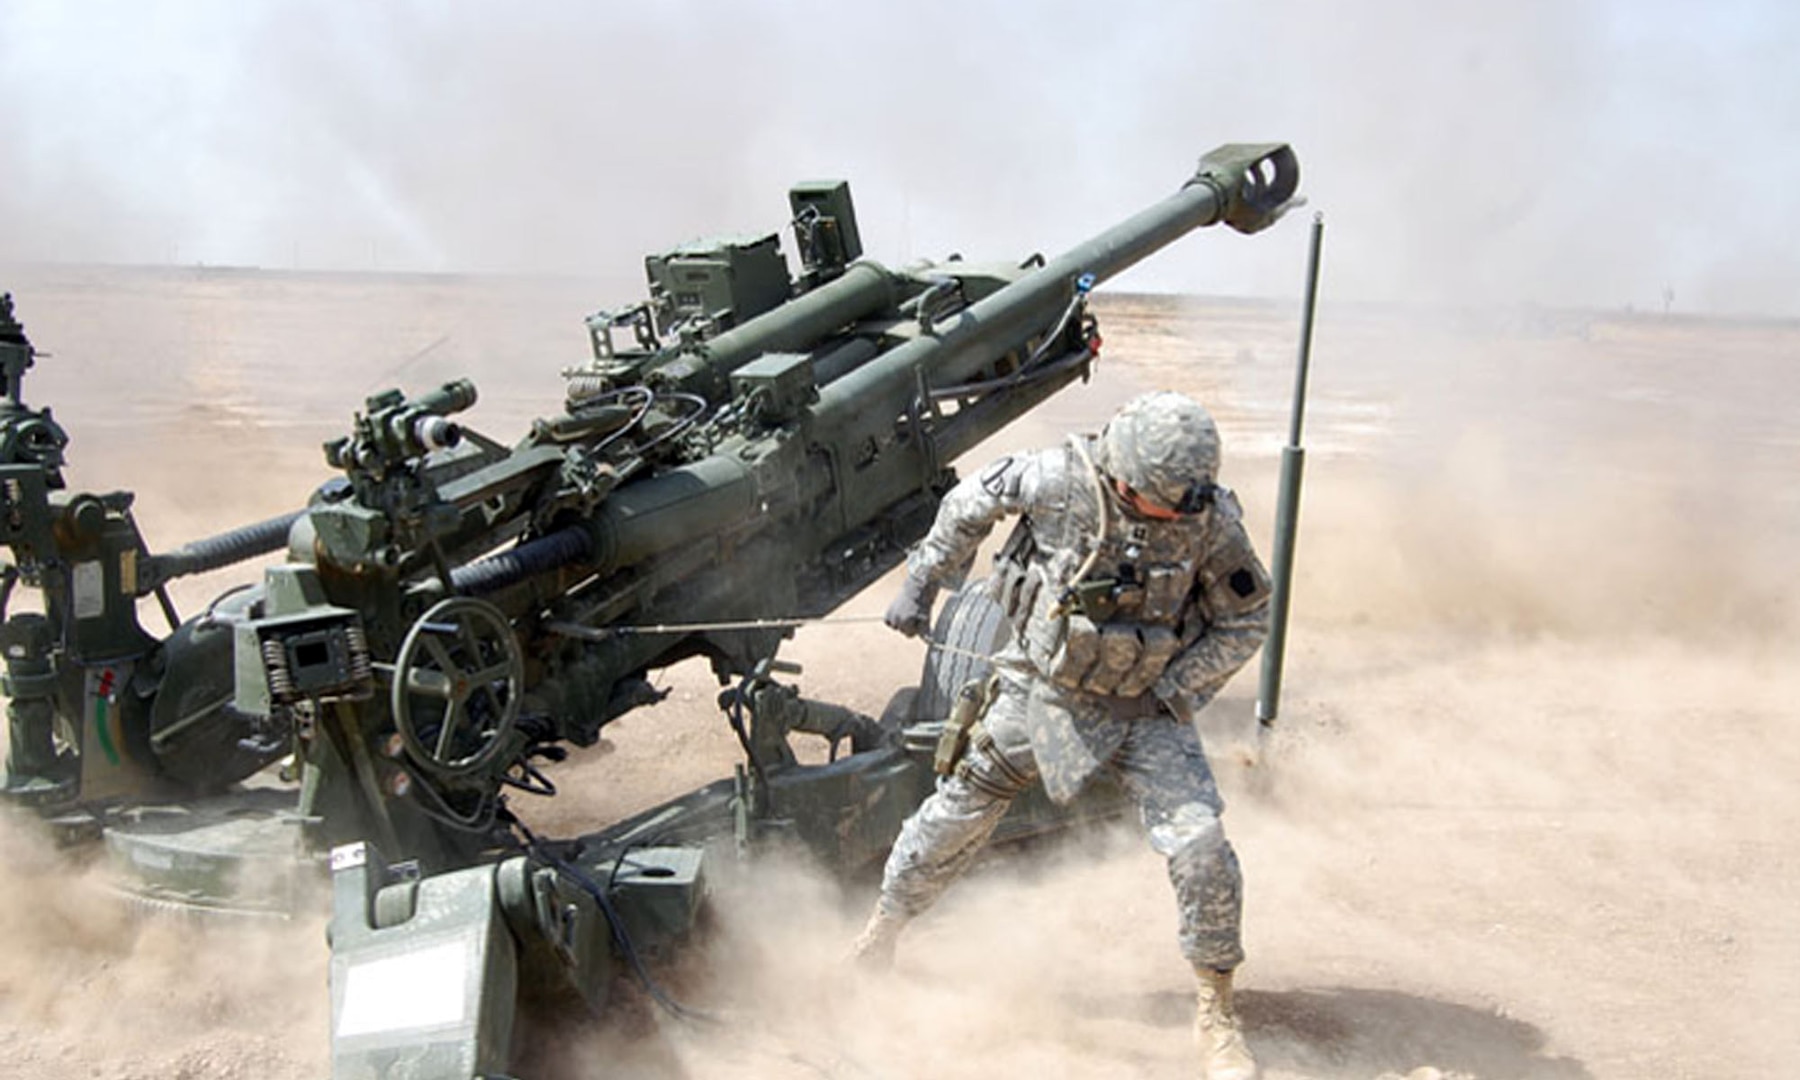 Members of B Battery calibrate the M777A2 in Iraq in March 2009, ensuring the weapon's accuracy and "dusting off the cobwebs" by re-familiarizing themselves with the howitzer.